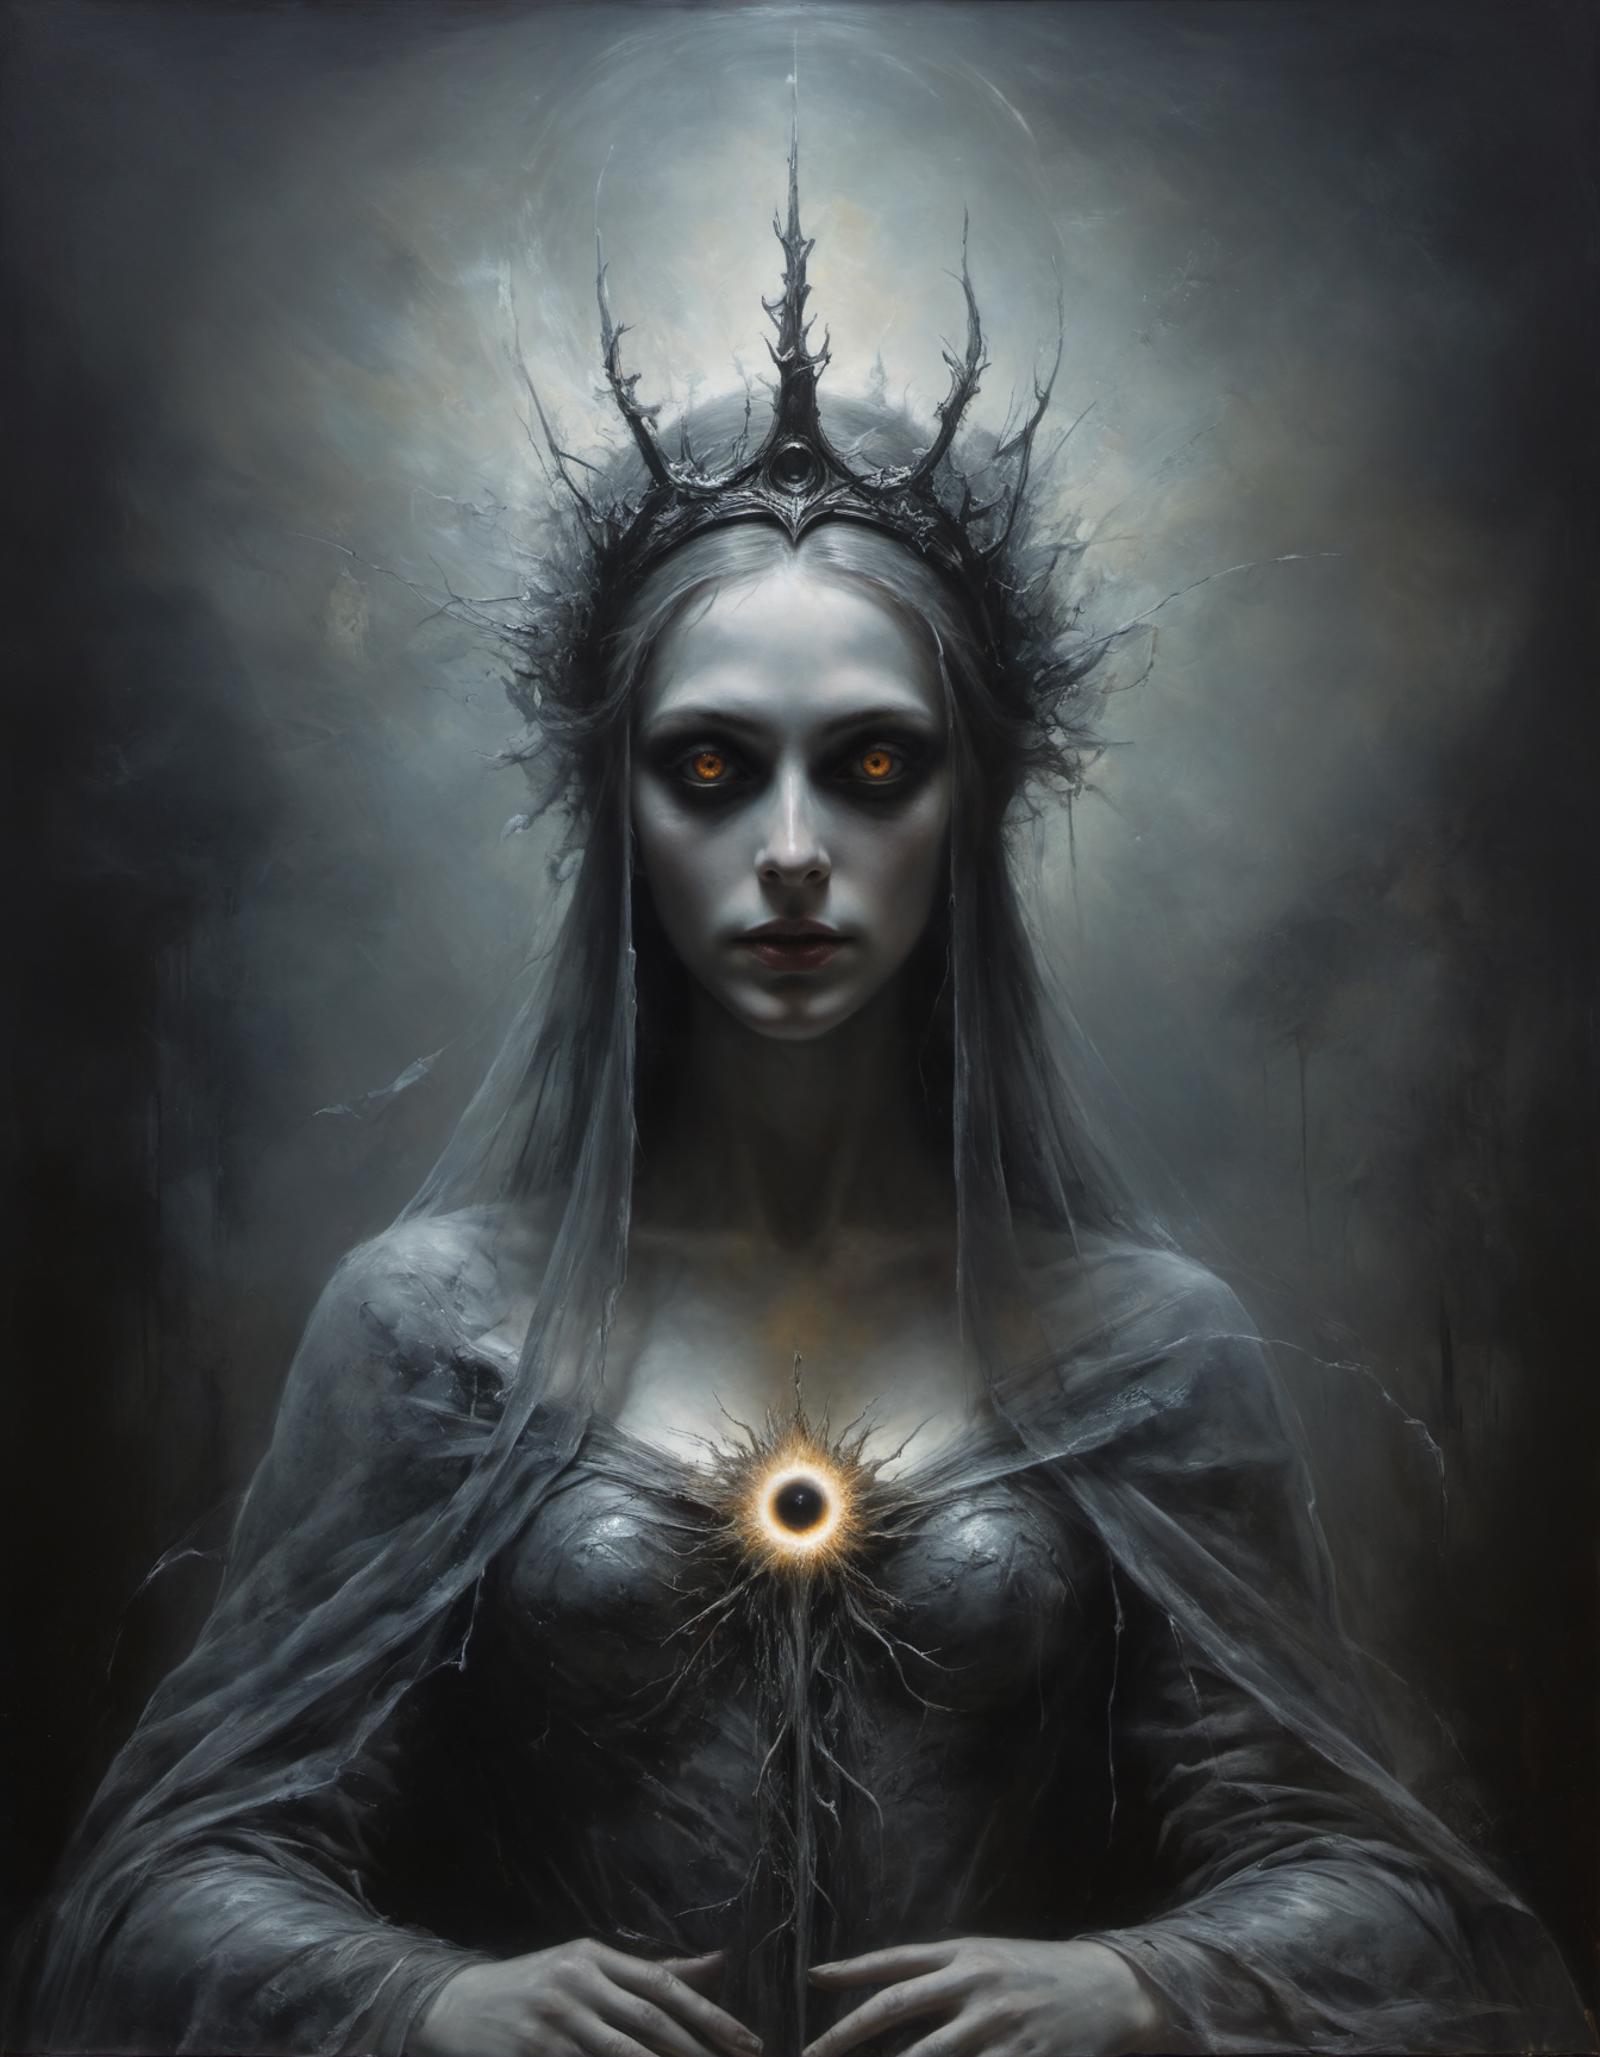 A Dark and Evil Painting of a Woman with a Crown and Sword, Created by a Skilled Artist